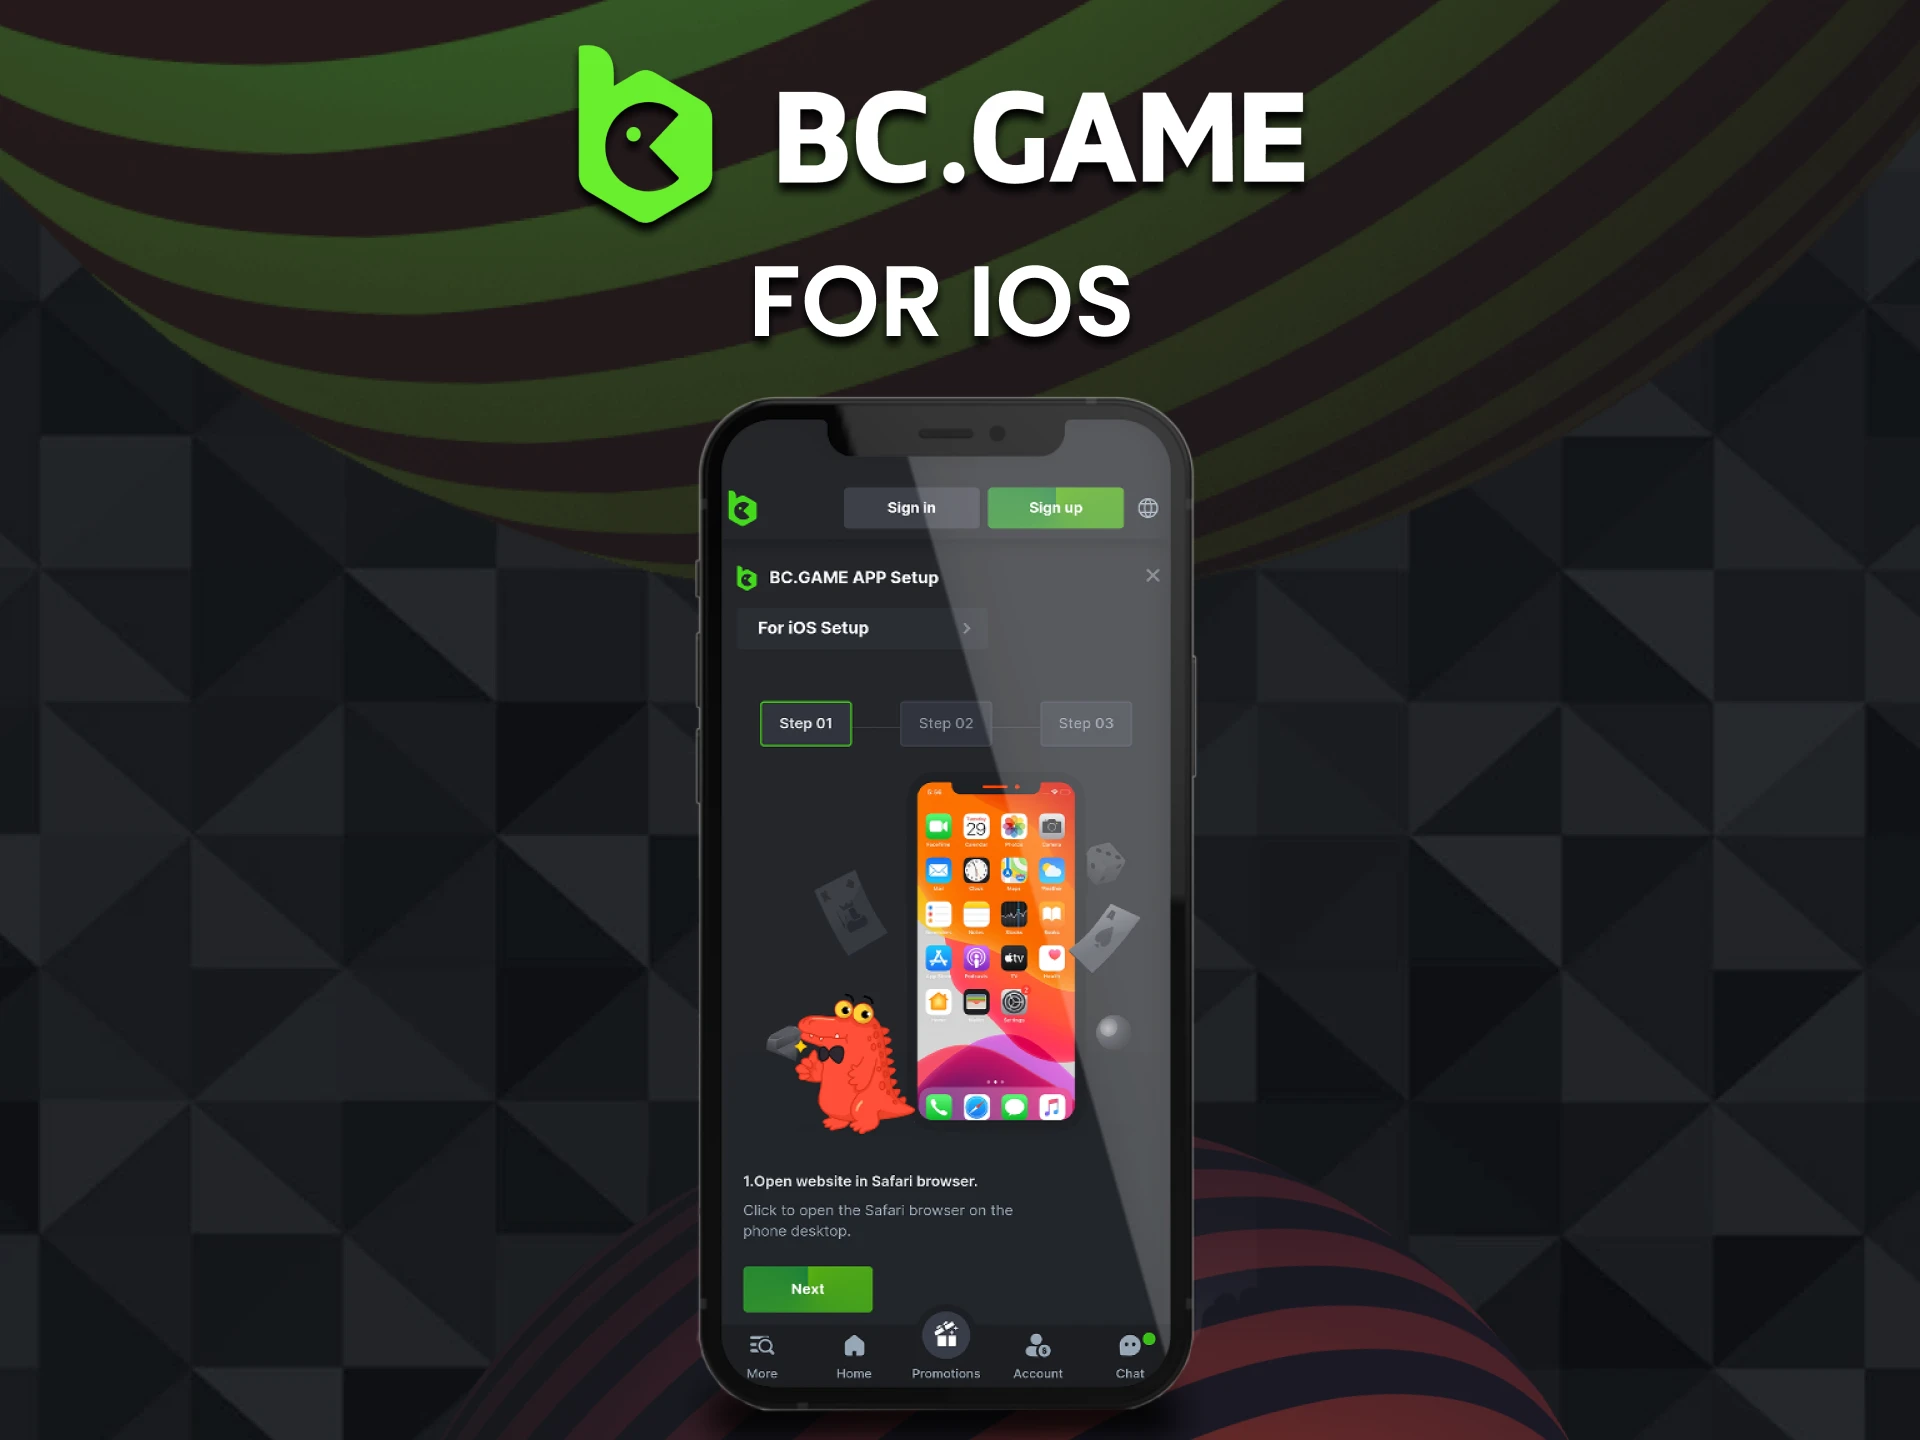 Download the BC Game app for iOS.